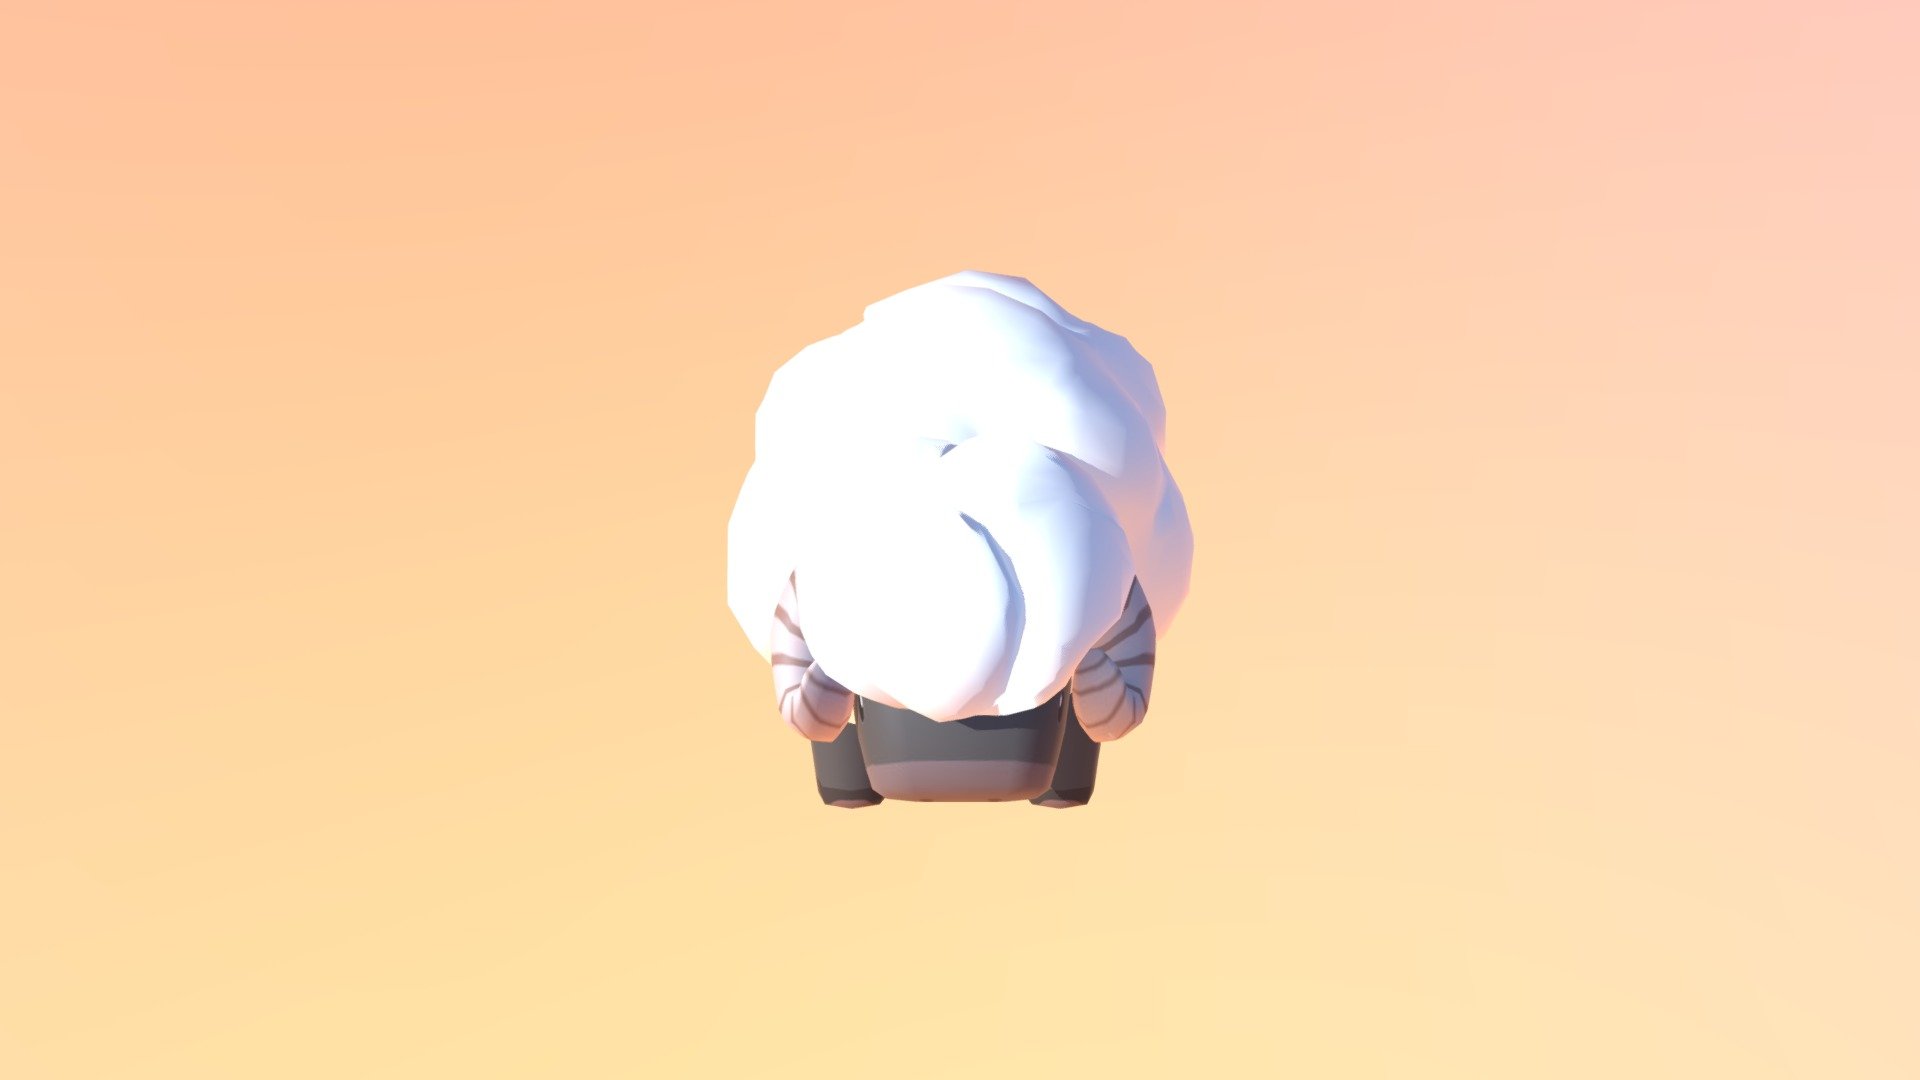 Sheep Asset I made for the game Udder Nonsense. For more information see https://www.christietanjaya.com/udder-nonsense - Sheep Asset - Udder Nonsense - 3D model by caixue 3d model